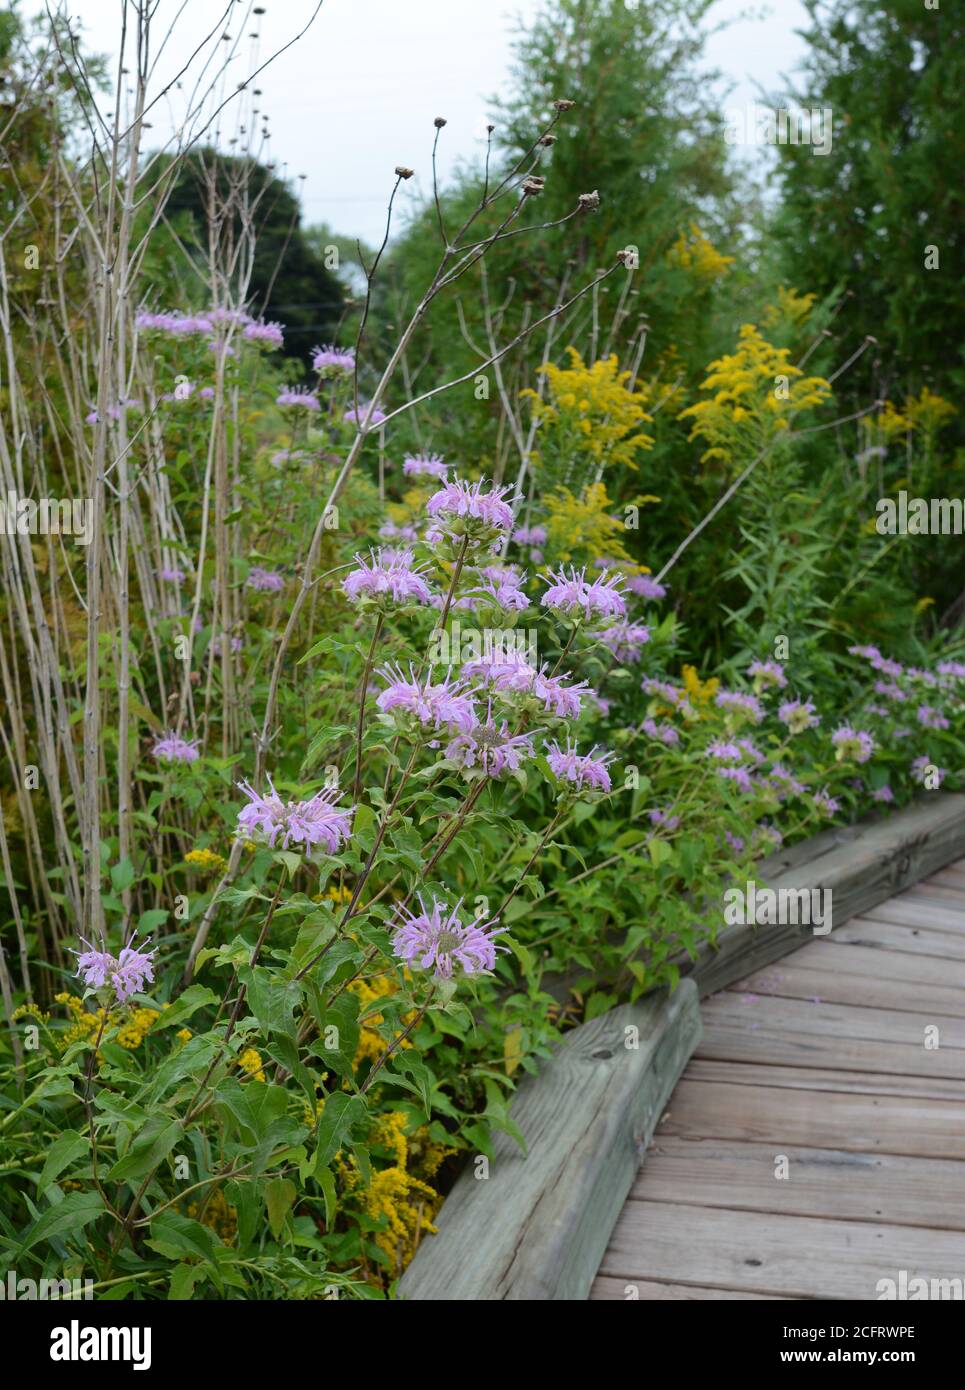 Lavender colored Bee Balm (Monarda) growing along a wooden pathway. Stock Photo